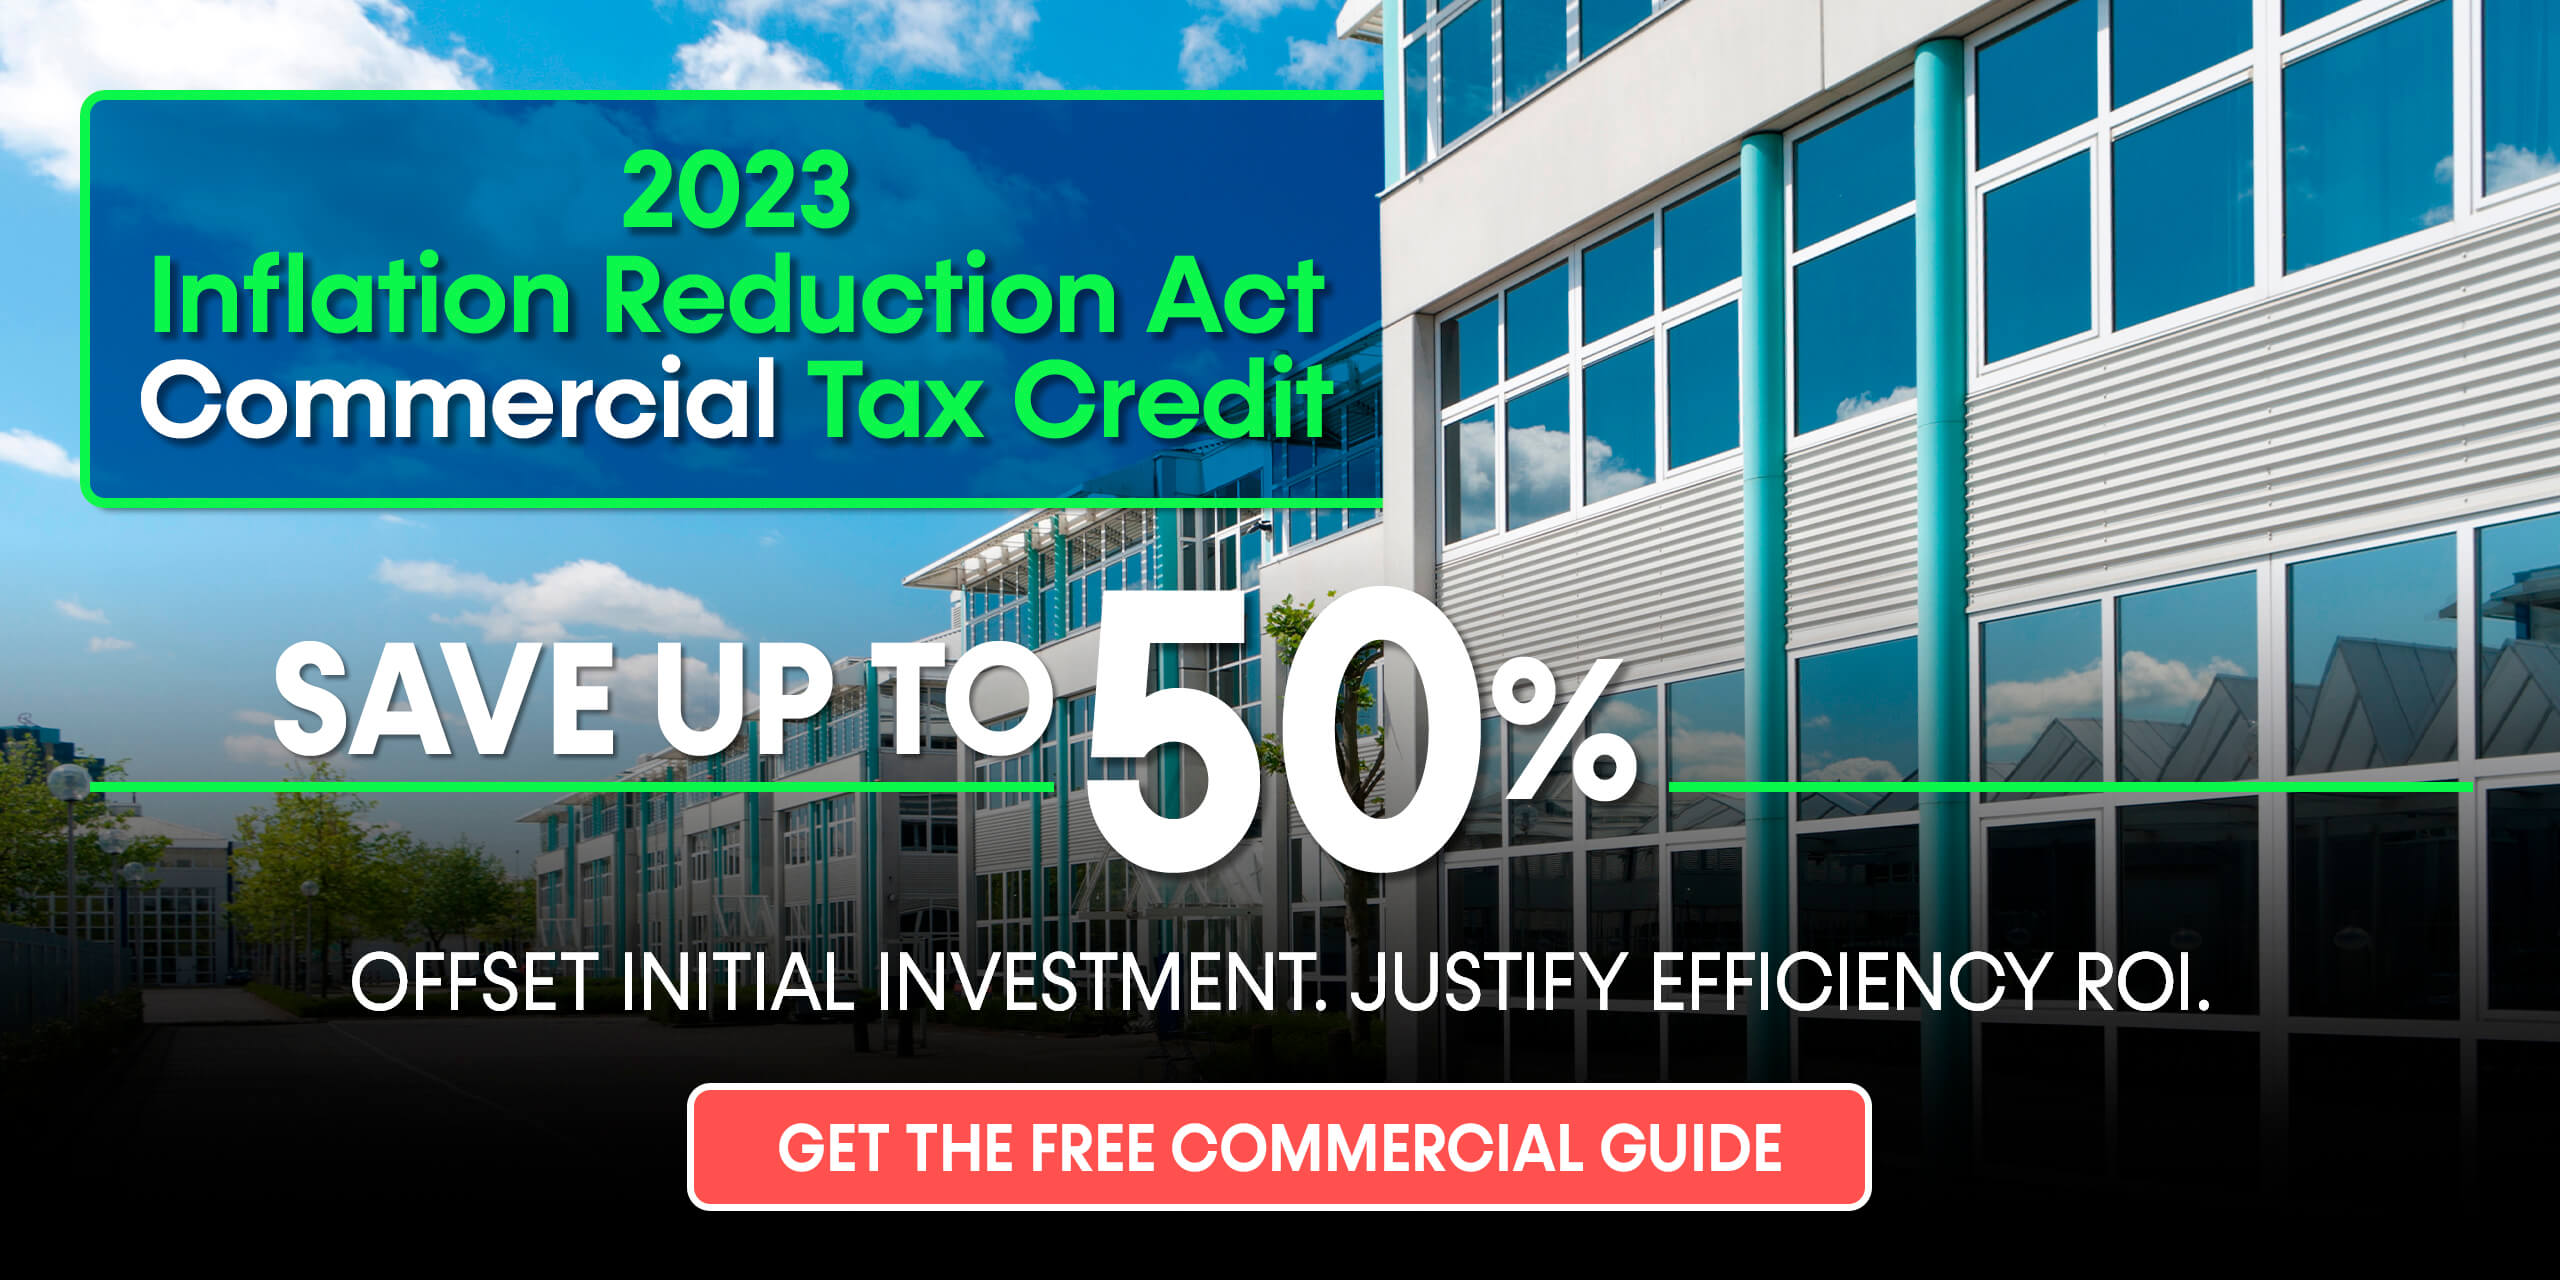 2023 Inflation Reduction Act Commercial Tax Credit - Save Up To 50%: Offset Initial Investment. Justify Efficiency ROI.